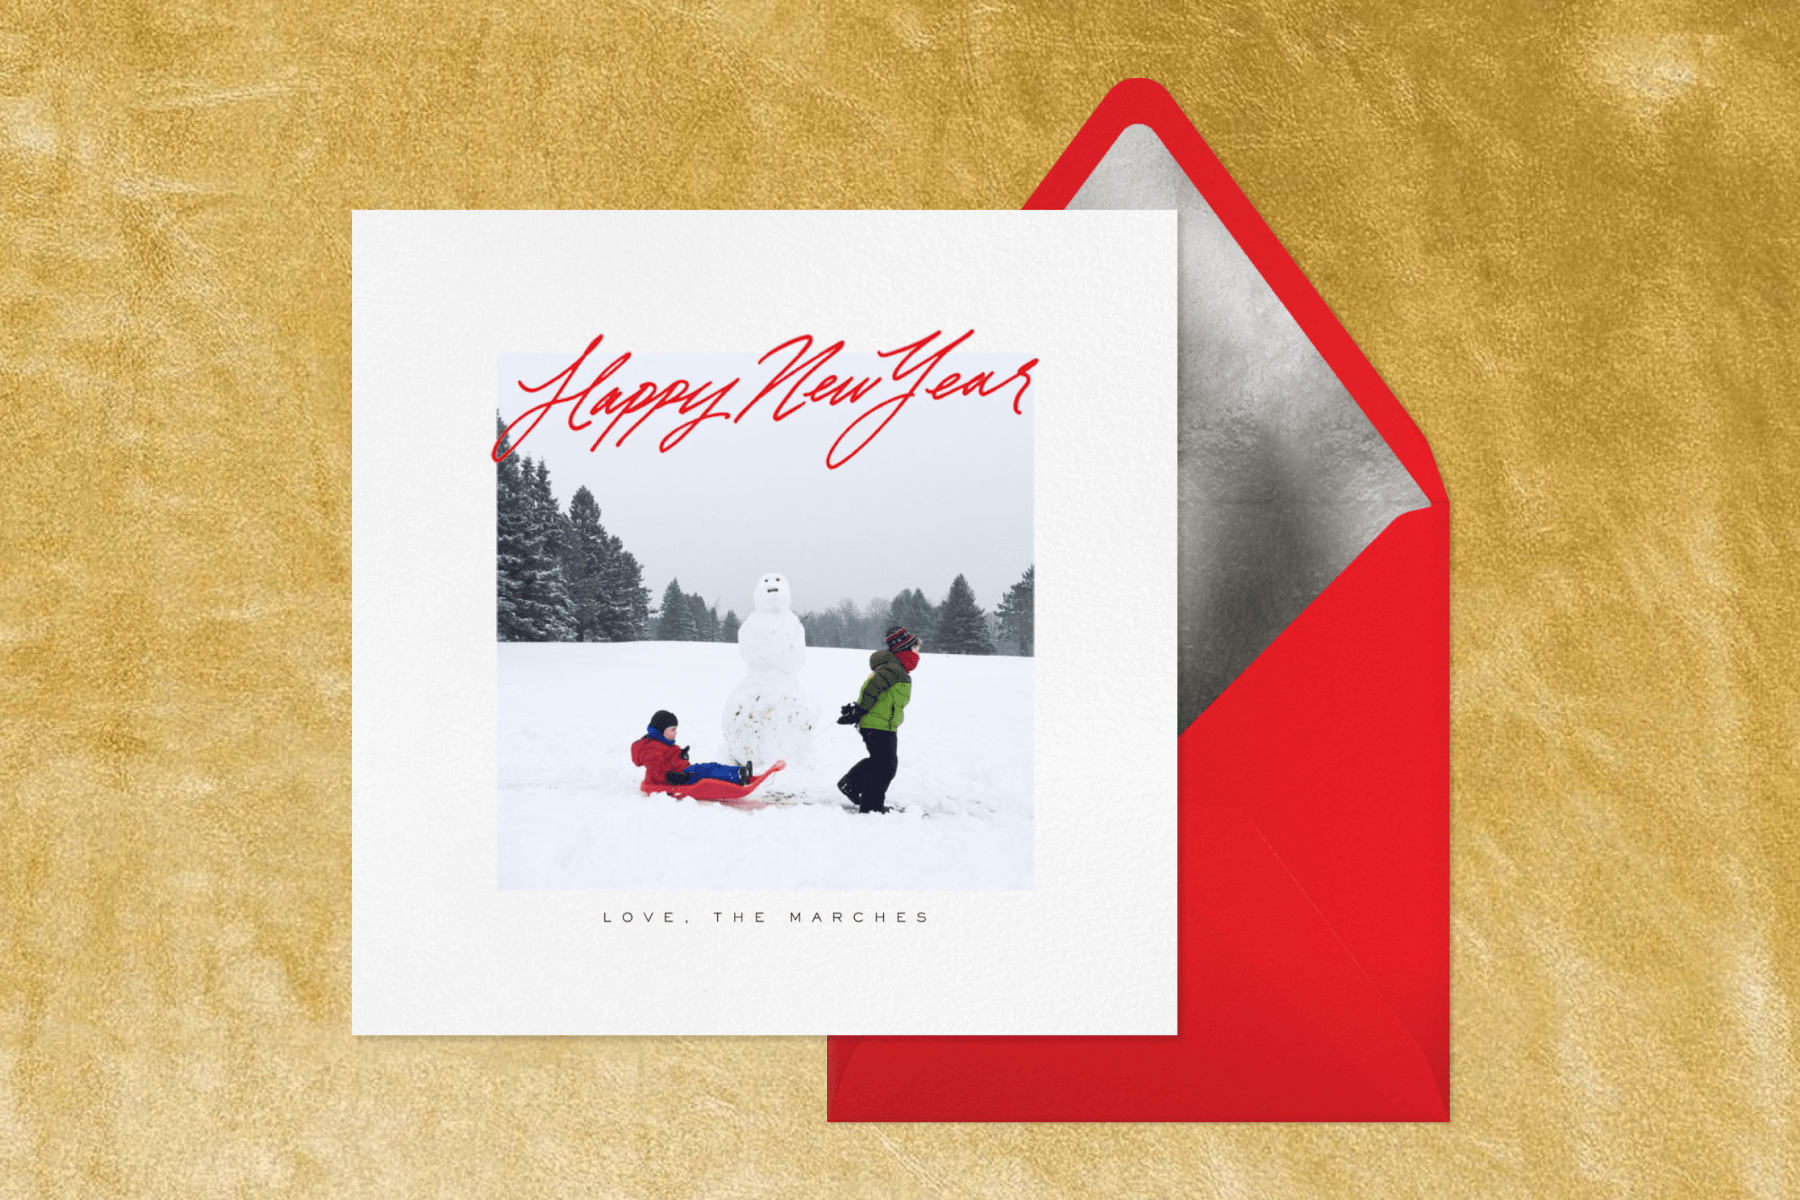 A white new year card with a square photo and the script "Happy New Year."